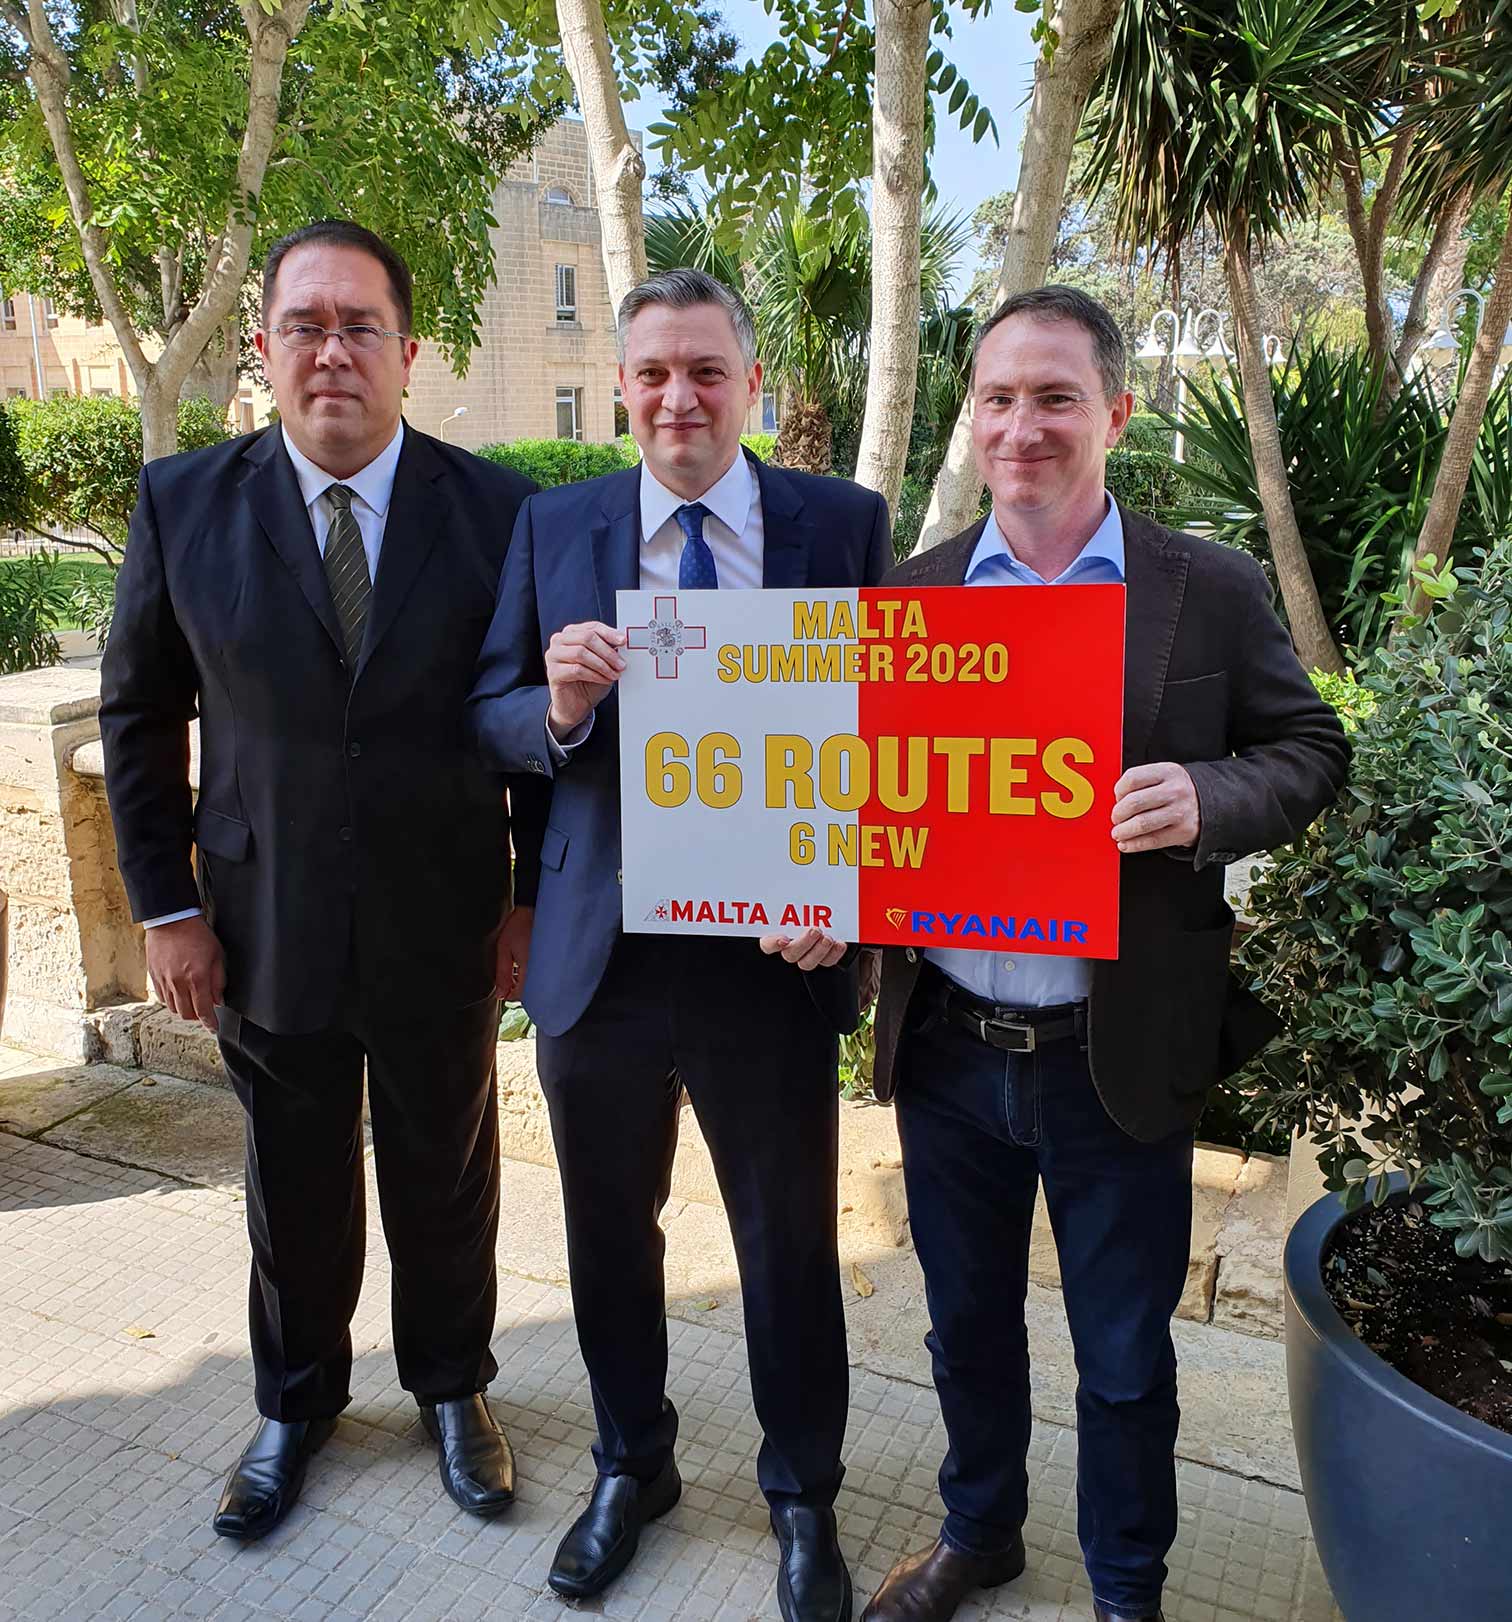 Malta Air Launches 6 New Routes To Malta For Summer 2020